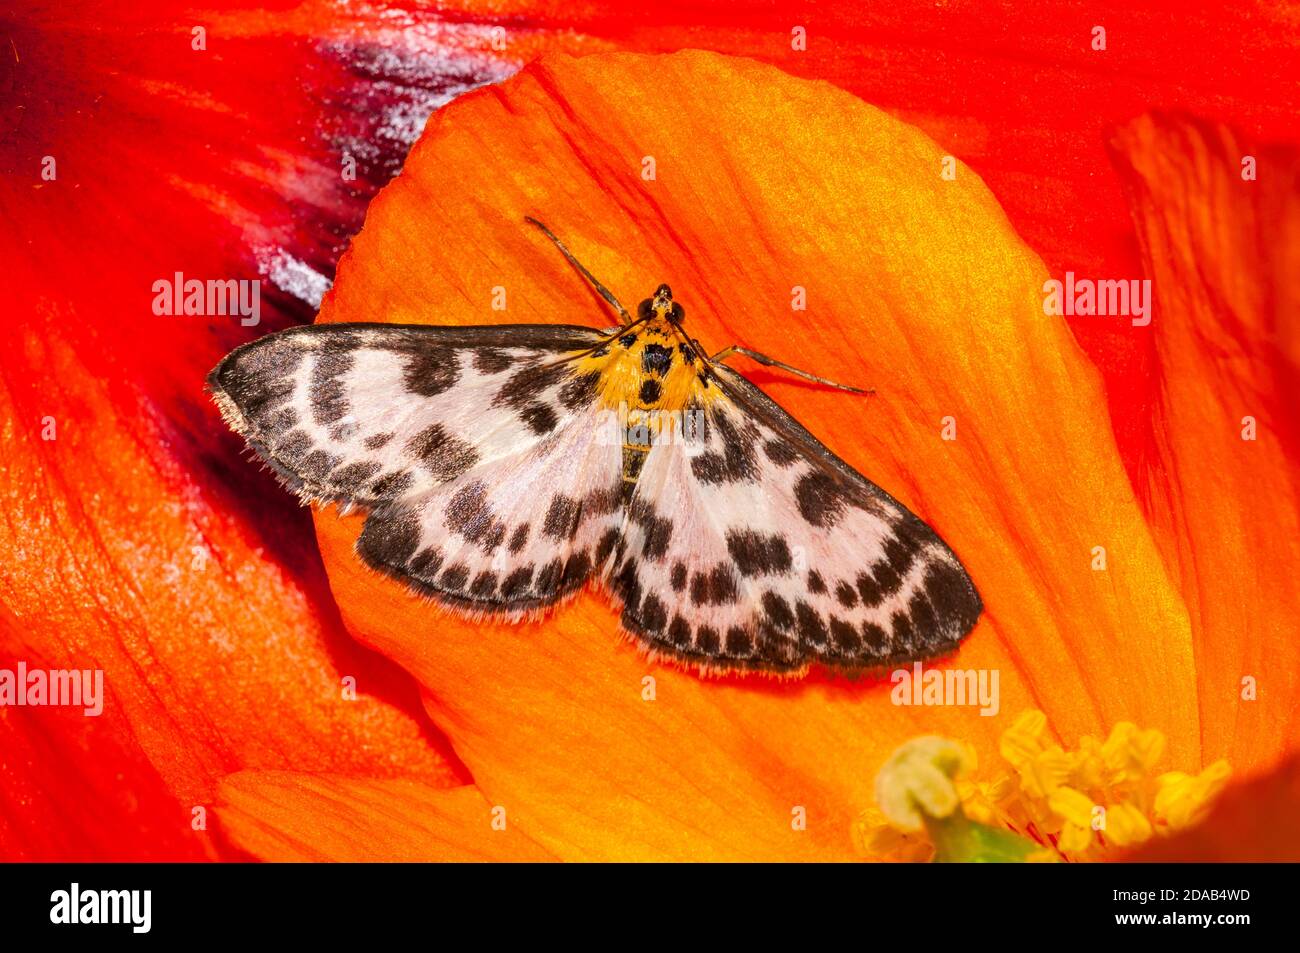 An adult small magpie moth (Eurrhypara hortulata) at rest on the orange bloom of a Californian poppy (Eschscholzia californica)  flower in a garden in Stock Photo